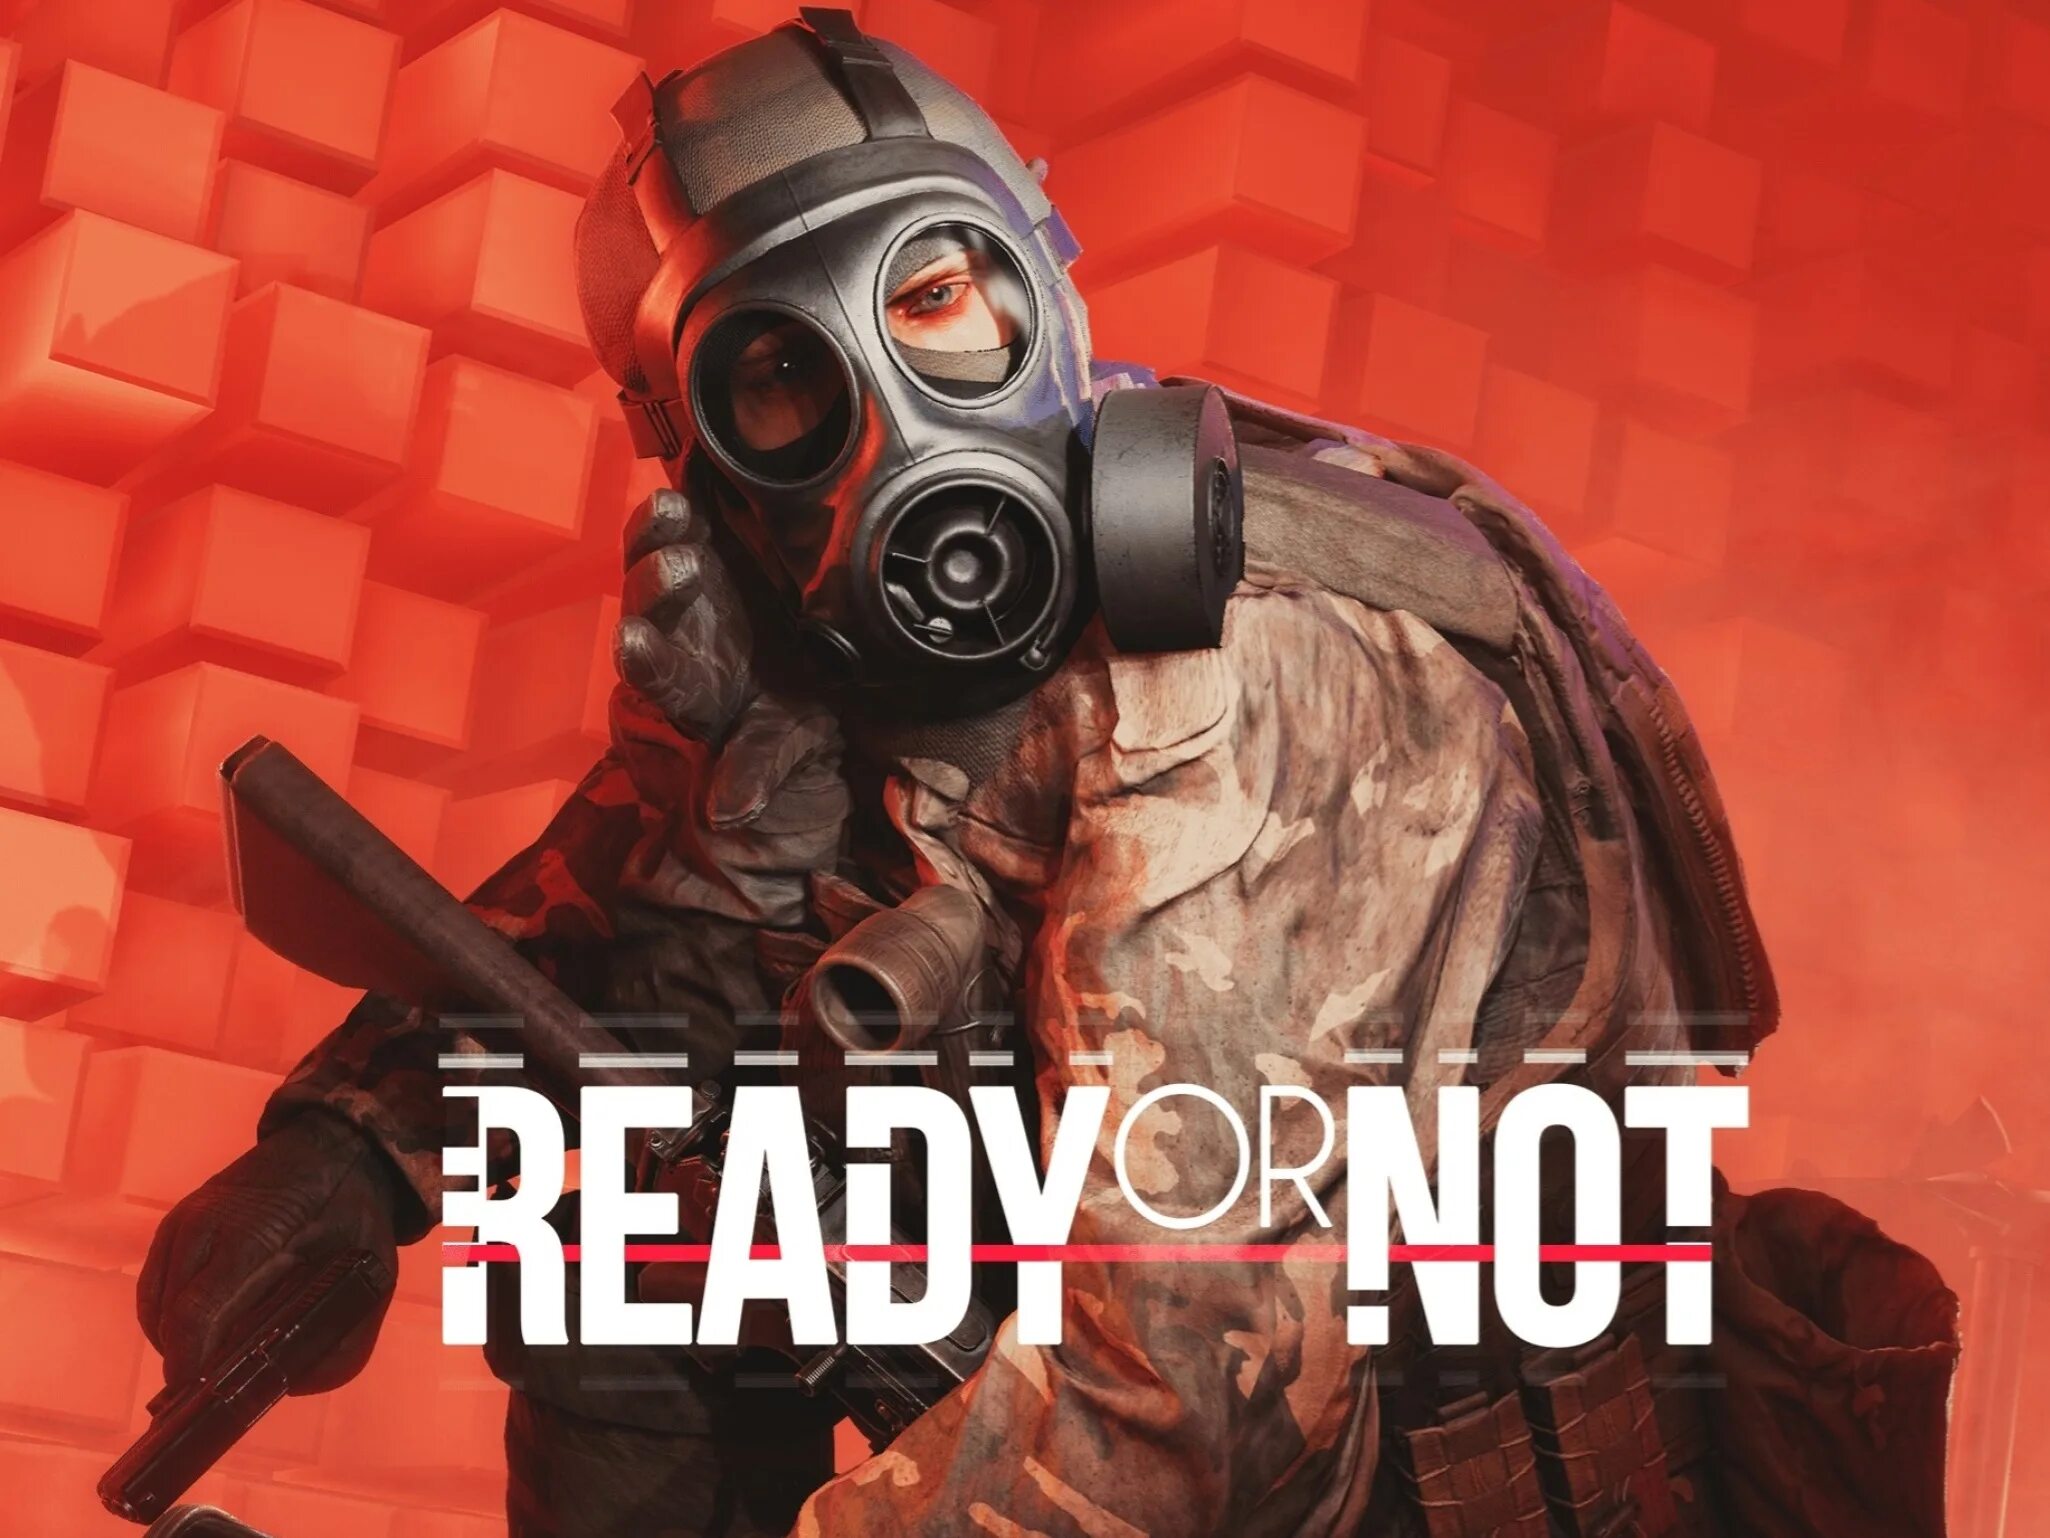 Ready or not карты. Ready or not. Ready or not SWAT. SWAT 4 ready or not. Ready or not игра.